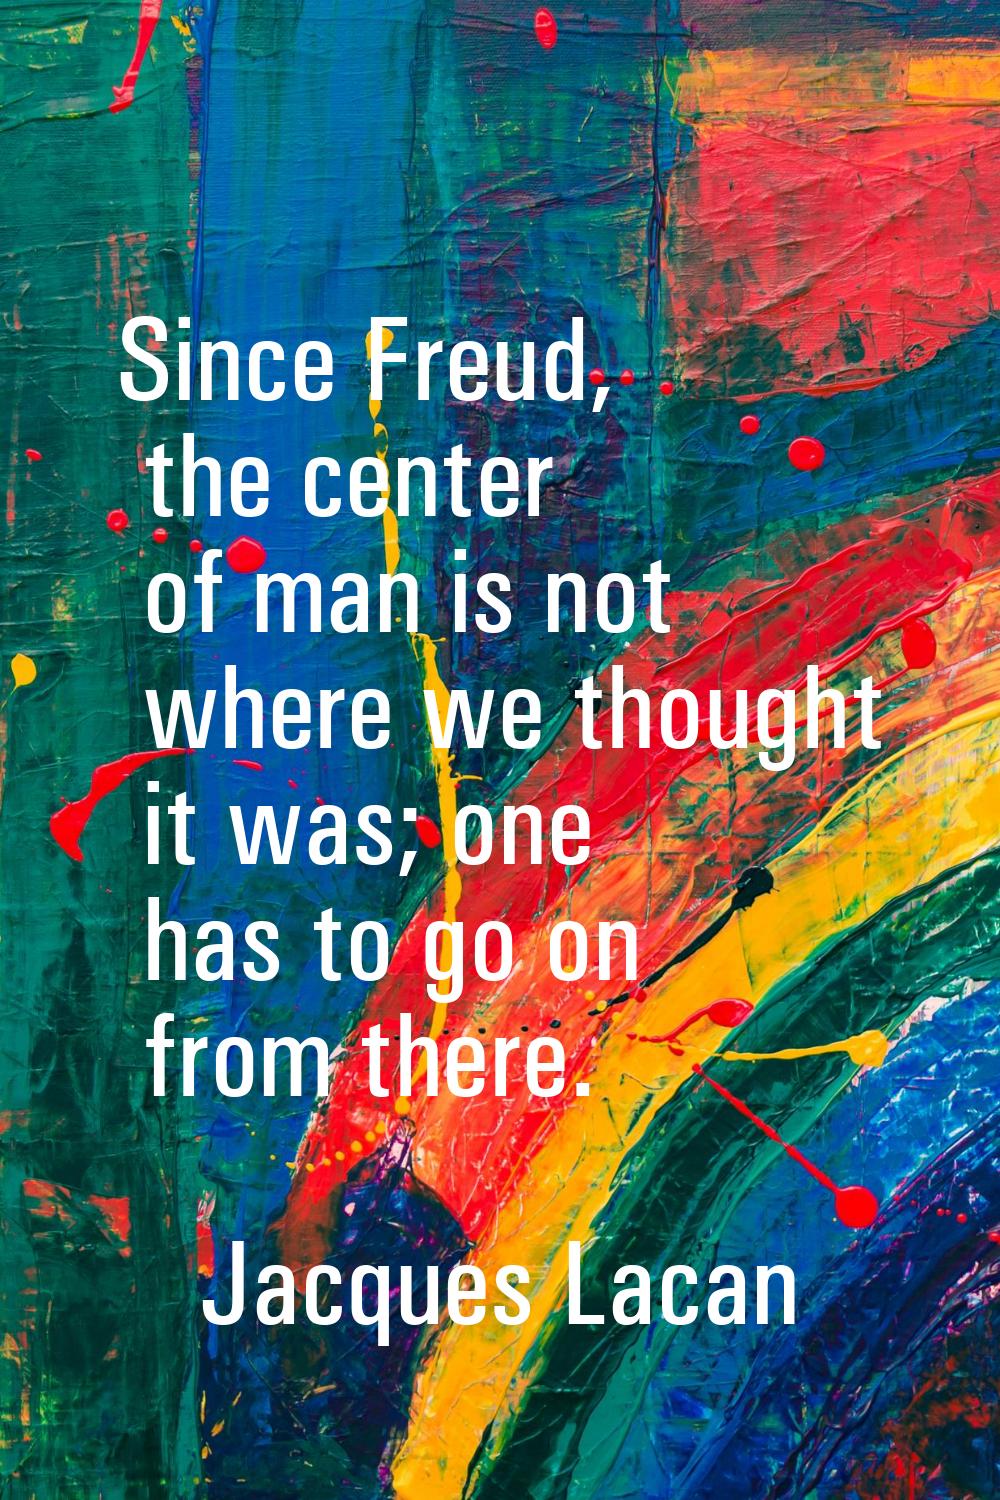 Since Freud, the center of man is not where we thought it was; one has to go on from there.